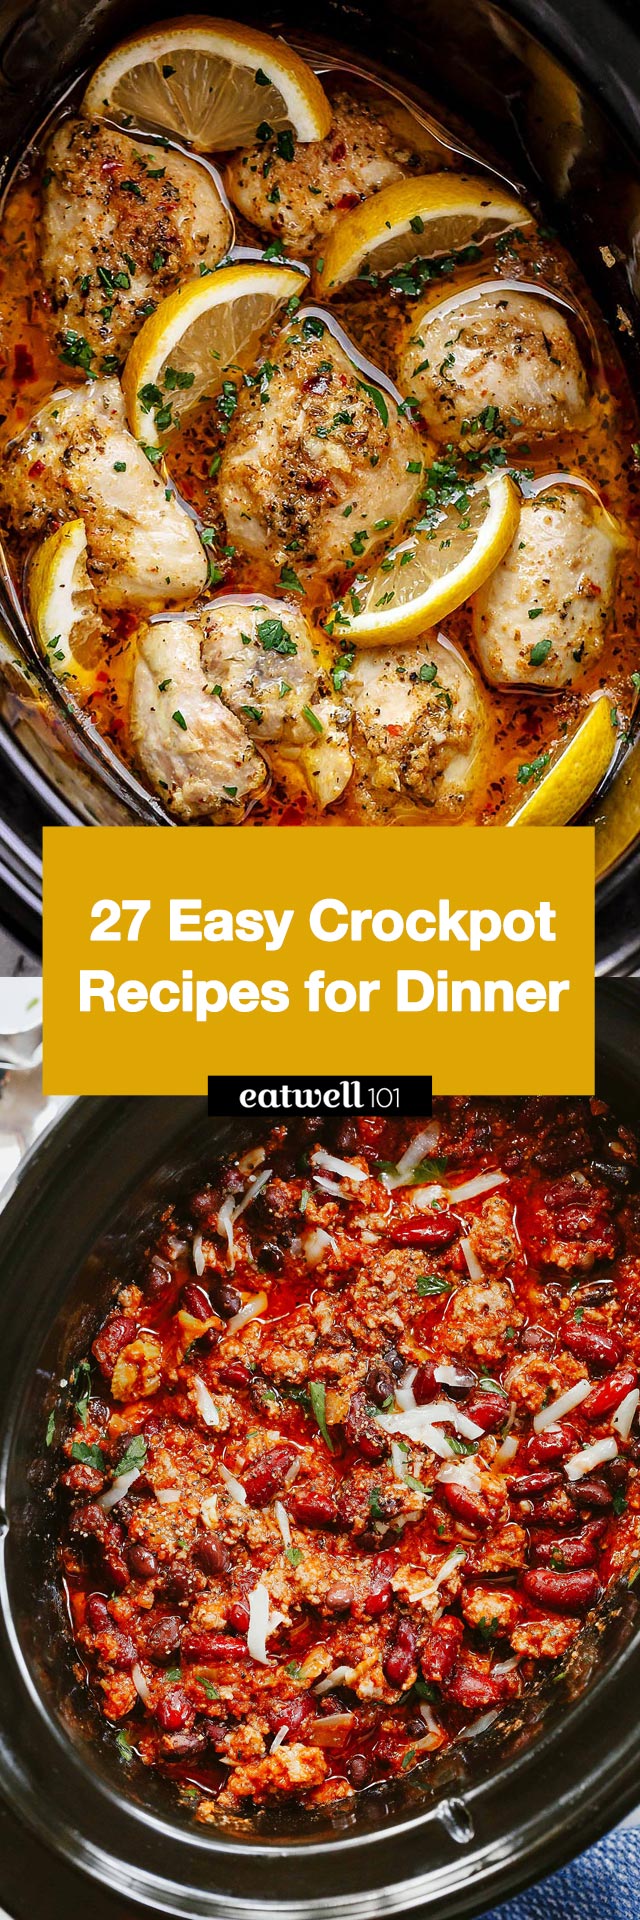 27 Easy & Healthy Crockpot Recipes for Dinners - #crockpot #recipes #eatwell101 - Try these easy, healthy Crockpot recipes for dinner! Including recipes for Crockpot chicken, Crockpot beef, Crockpot soups, Crockpot chilis, and more!